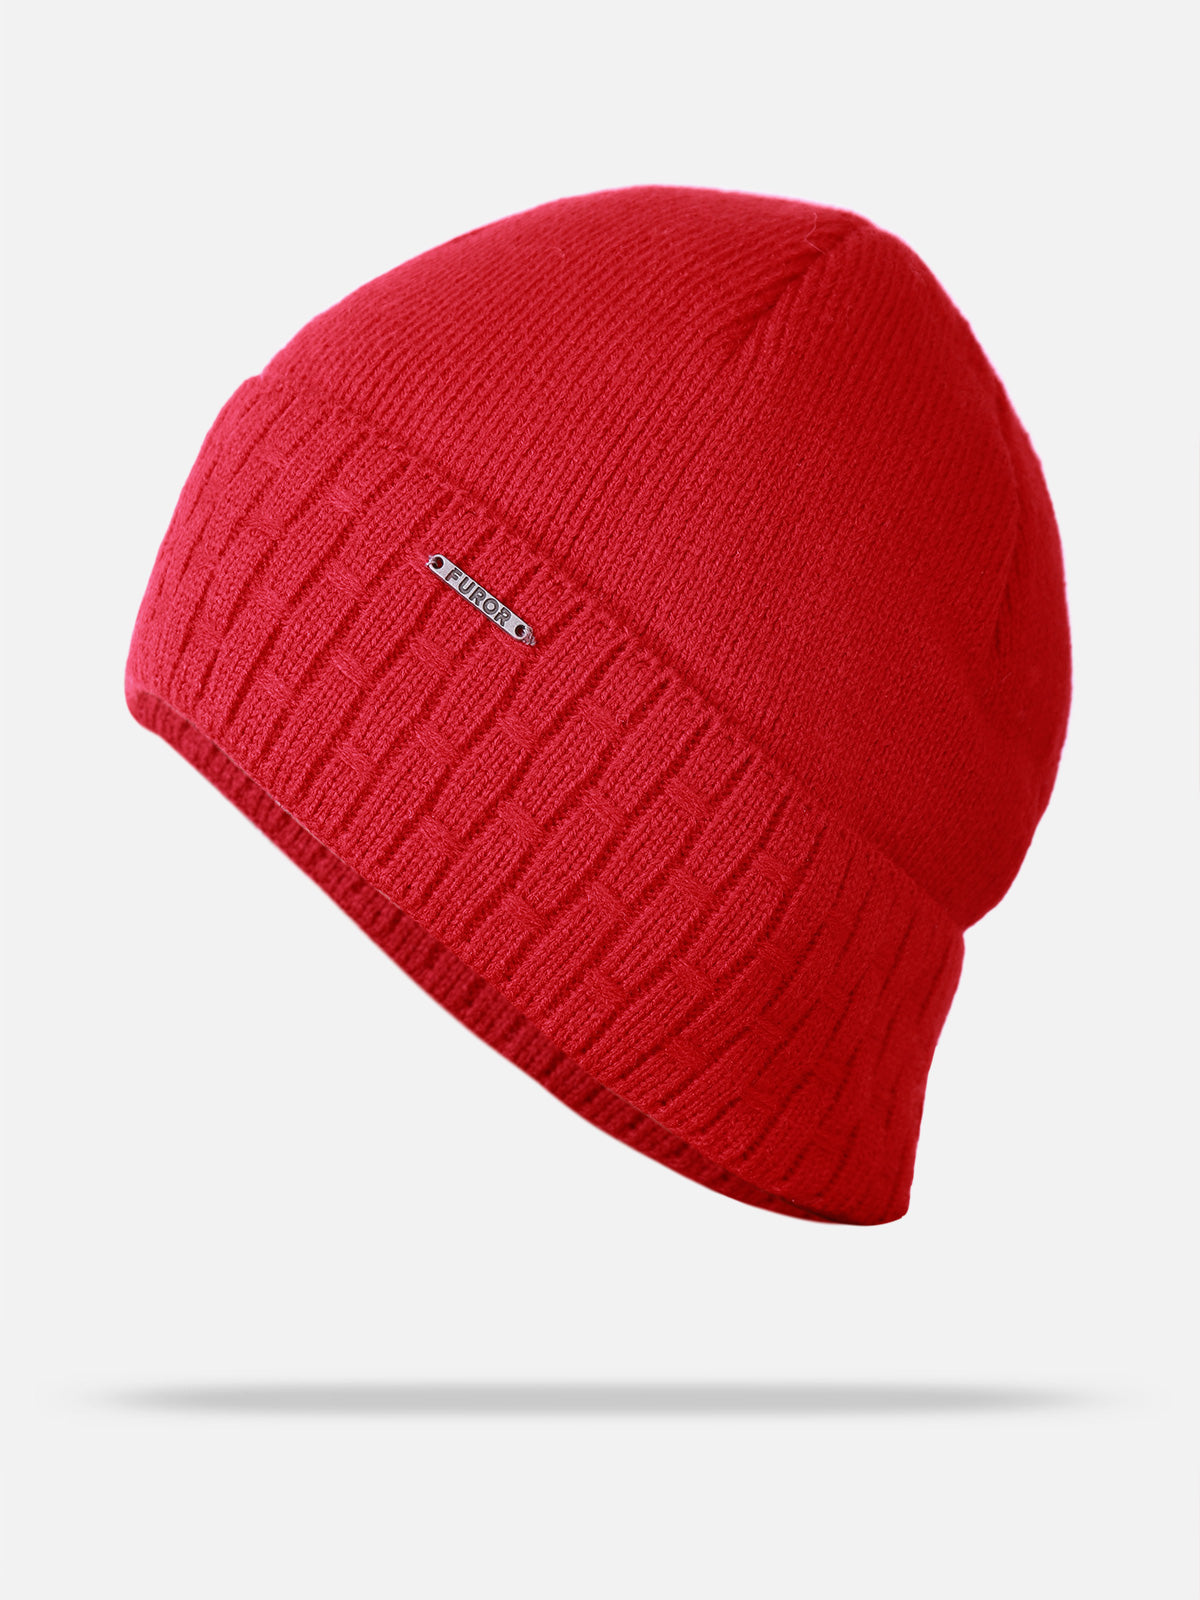 Red Knitted Beanie - FABC21-010